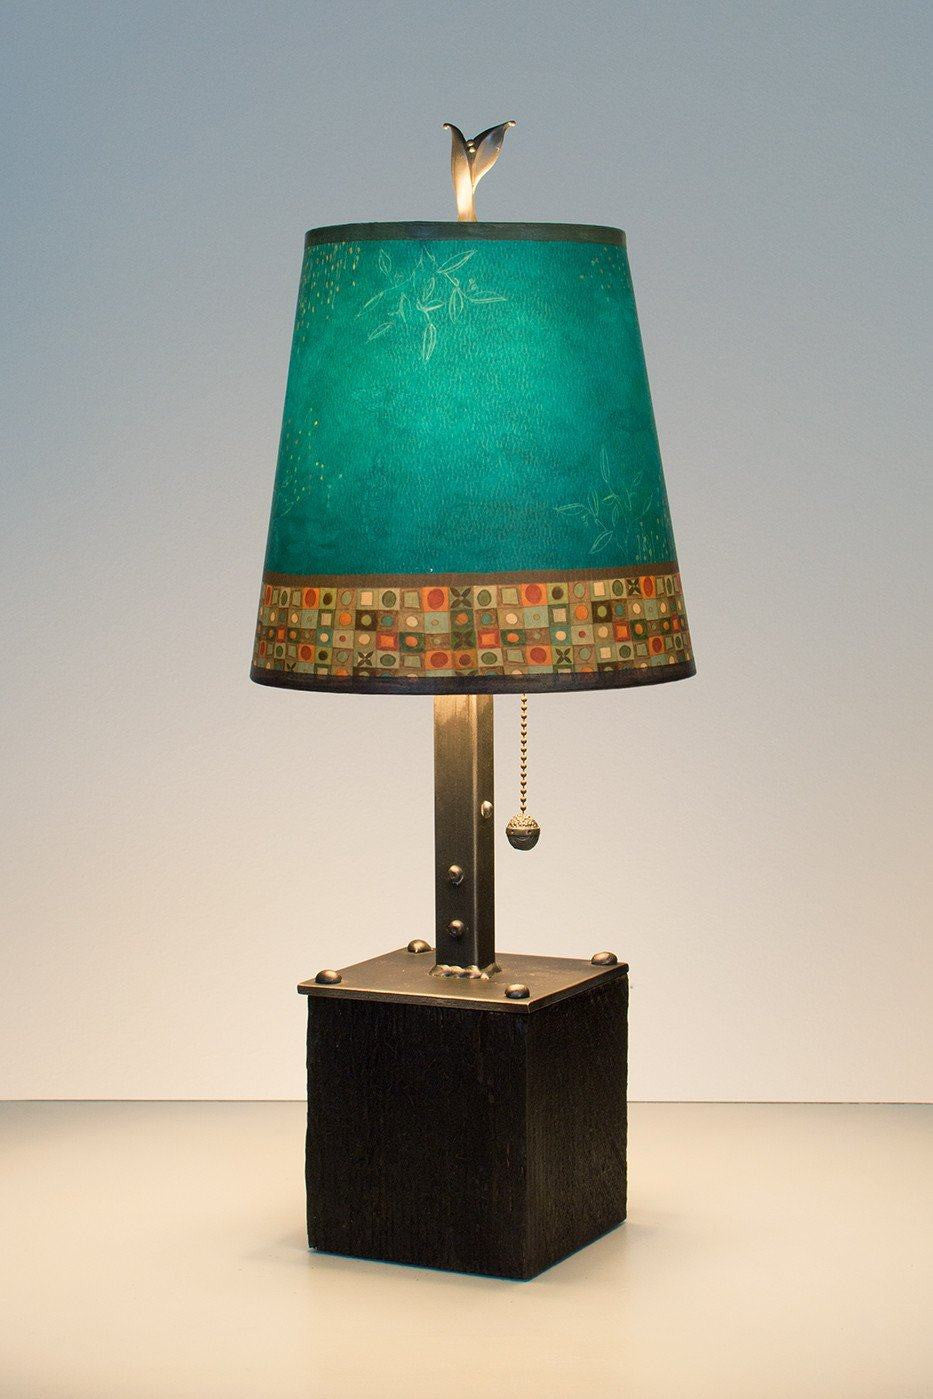 Steel Table Lamp on Reclaimed Wood with Small Drum Shade in Jade Mosaic Lit